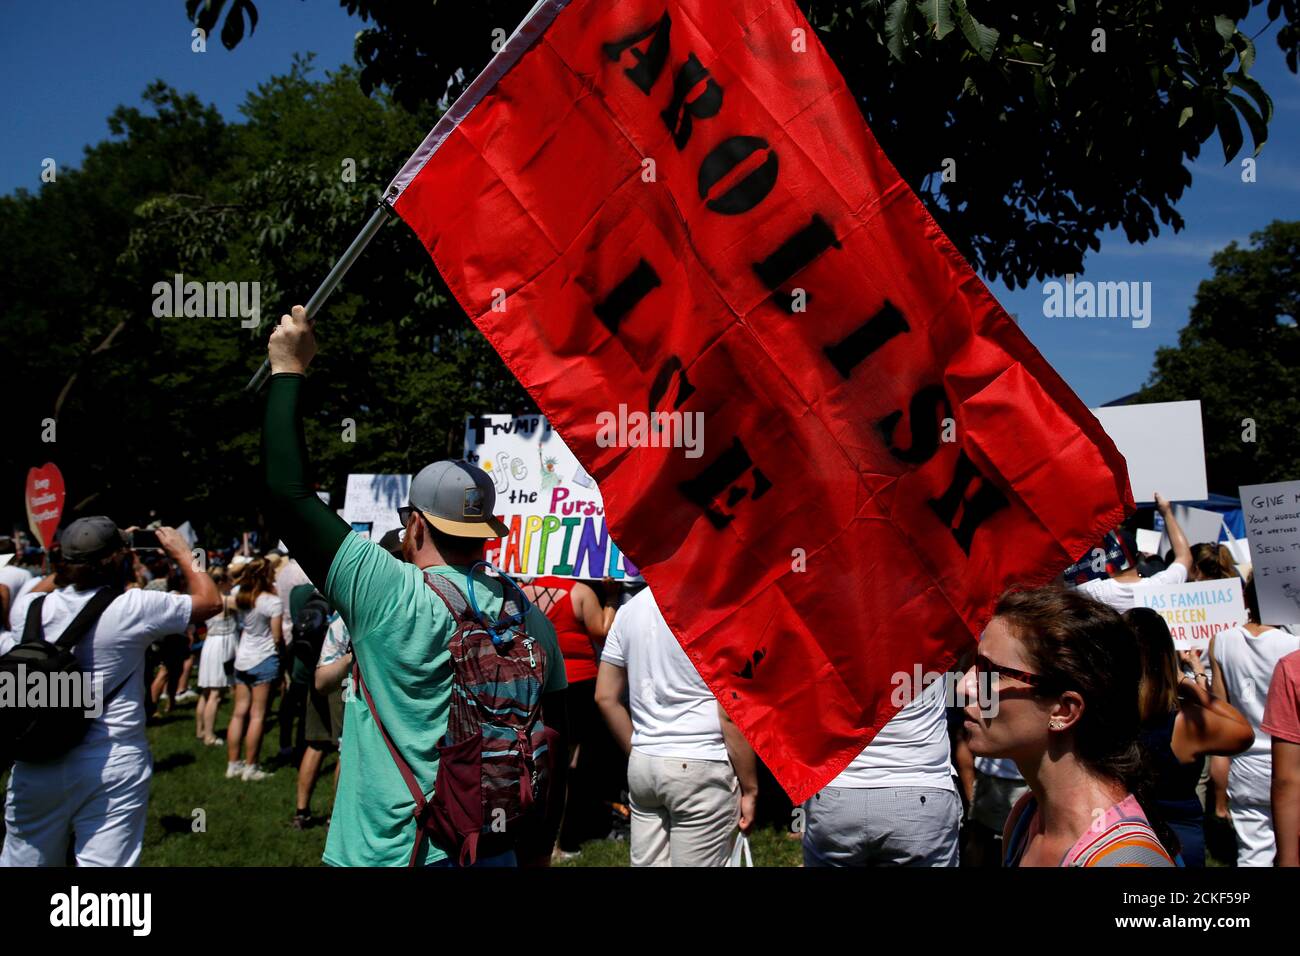 An immigration activists carries a flag calling for the abolishment of ICE, U.S. Immigration and Customs Enforcement, during rally to protest against the Trump Administration's immigration policy outside the White House  in Washington, U.S., June 30, 2018.      REUTERS/Joshua Roberts Stock Photo